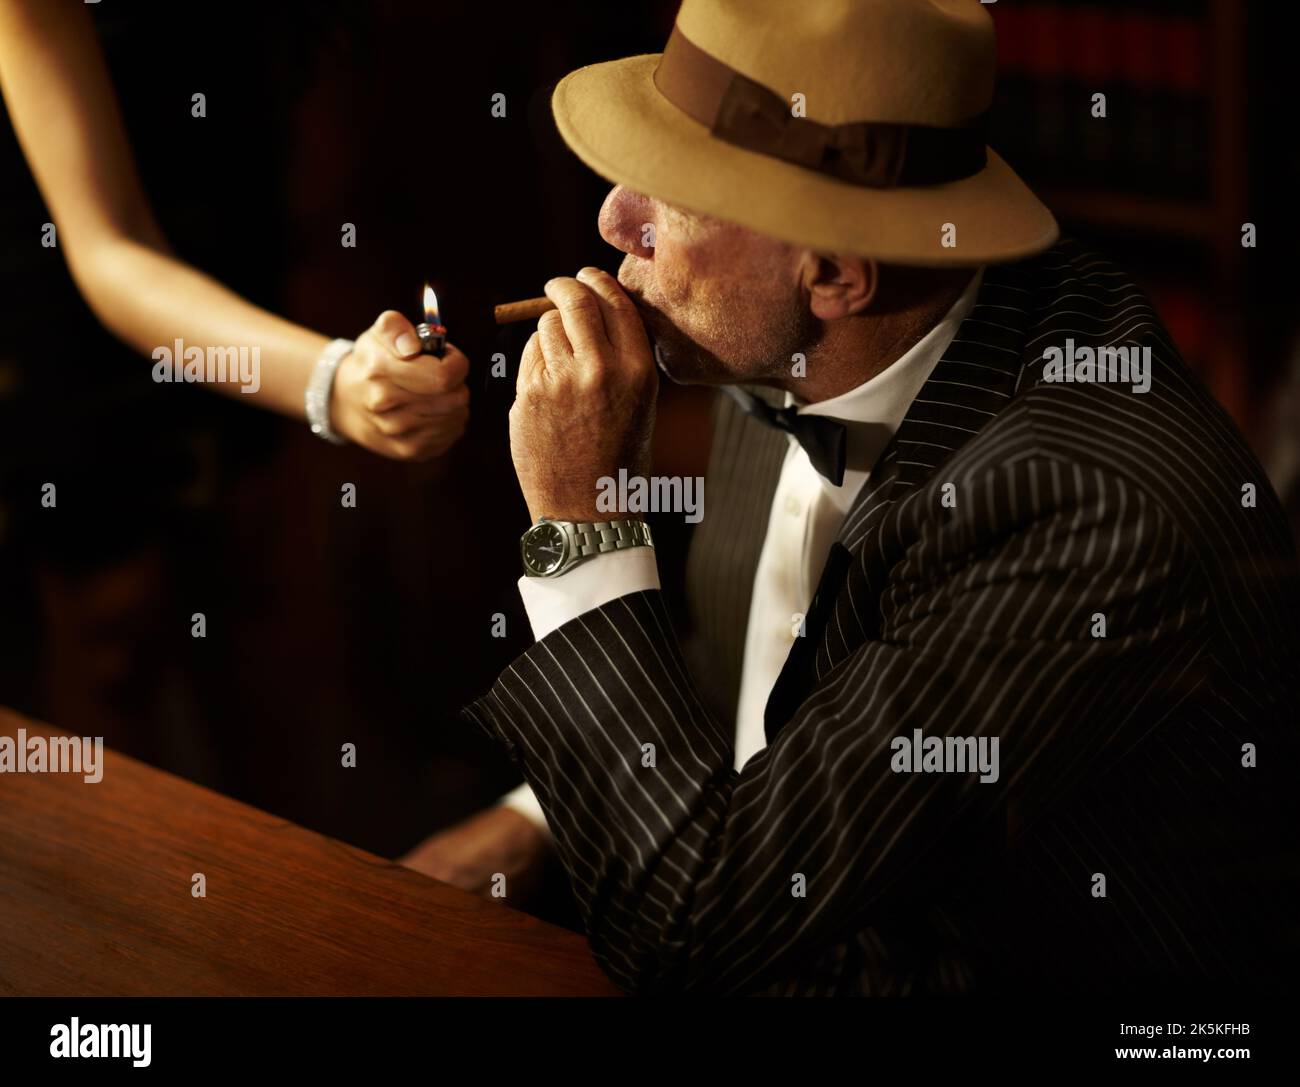 Hes got power and influence over others. Aged mob boss wearing a hat and looking serious while a woman lights up a cigarette for him. Stock Photo